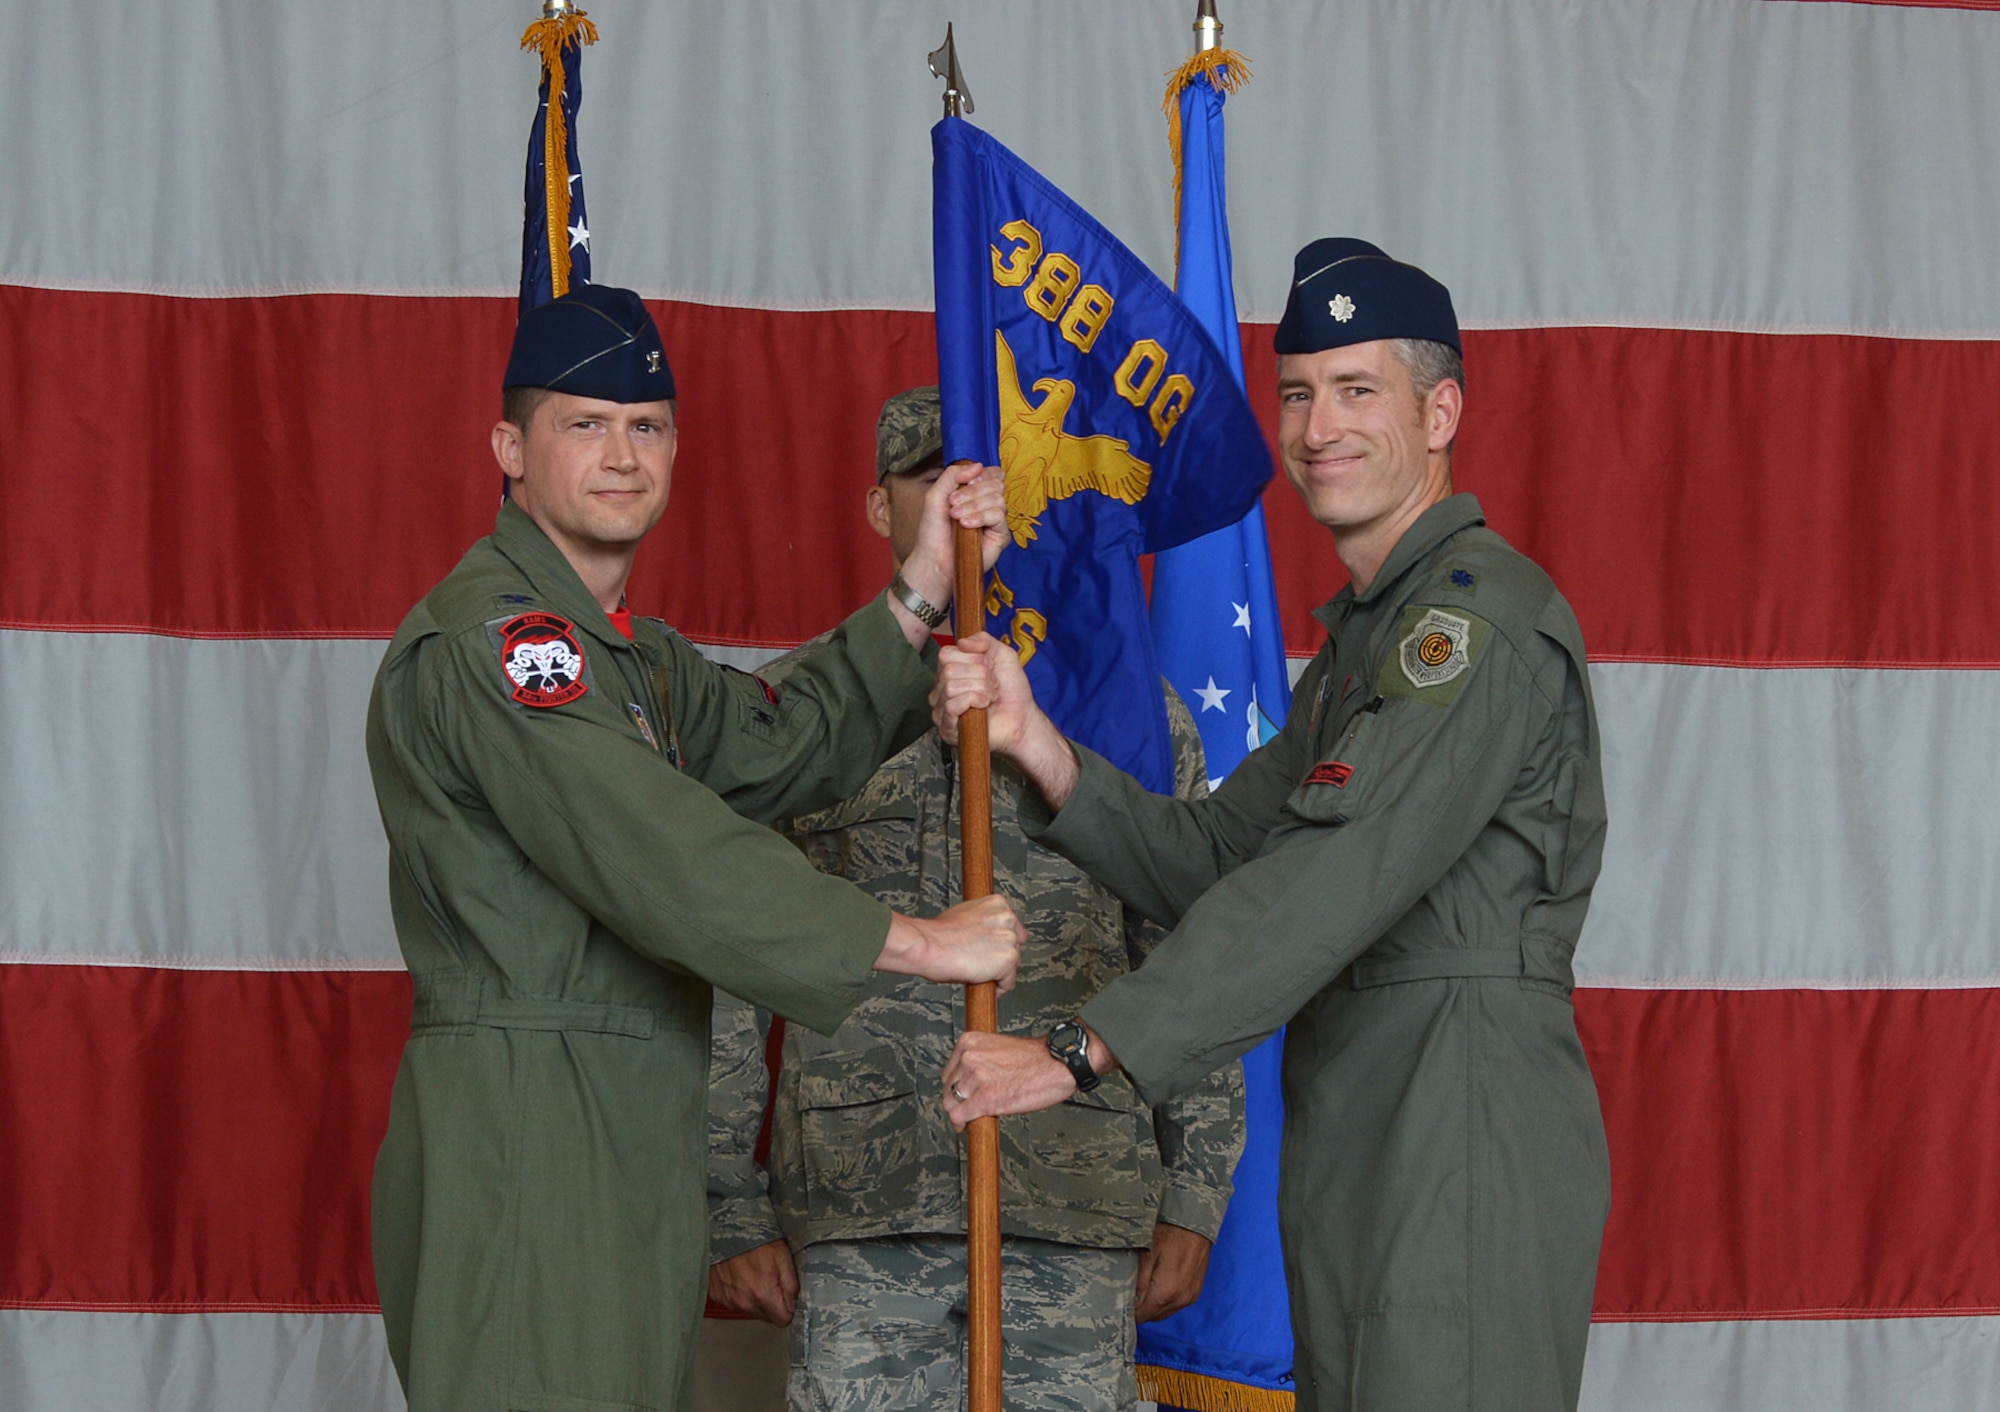 Col. David B. Lyons, 388th Fighter Wing commander, passes the guidon to Lt. Col. George R. Watkins during the 34th Fighter Squadron activation ceremony July 17 at Hill Air Force Base, Utah. The 34th will be the first combat squadron to fly the Air Force’s newest fighter aircraft, the F-35A. The squadron has an extremely rich history. After many contributions in major U.S. conflicts, the 34th was relocated to Hill AFB on Dec. 8, 1975, where they became the first fighter squadron to receive the F-16 fighter aircraft. The squadron’s first F-35A will arrive in September.  (U.S. Air Force photo by Alex R. Lloyd/Released)